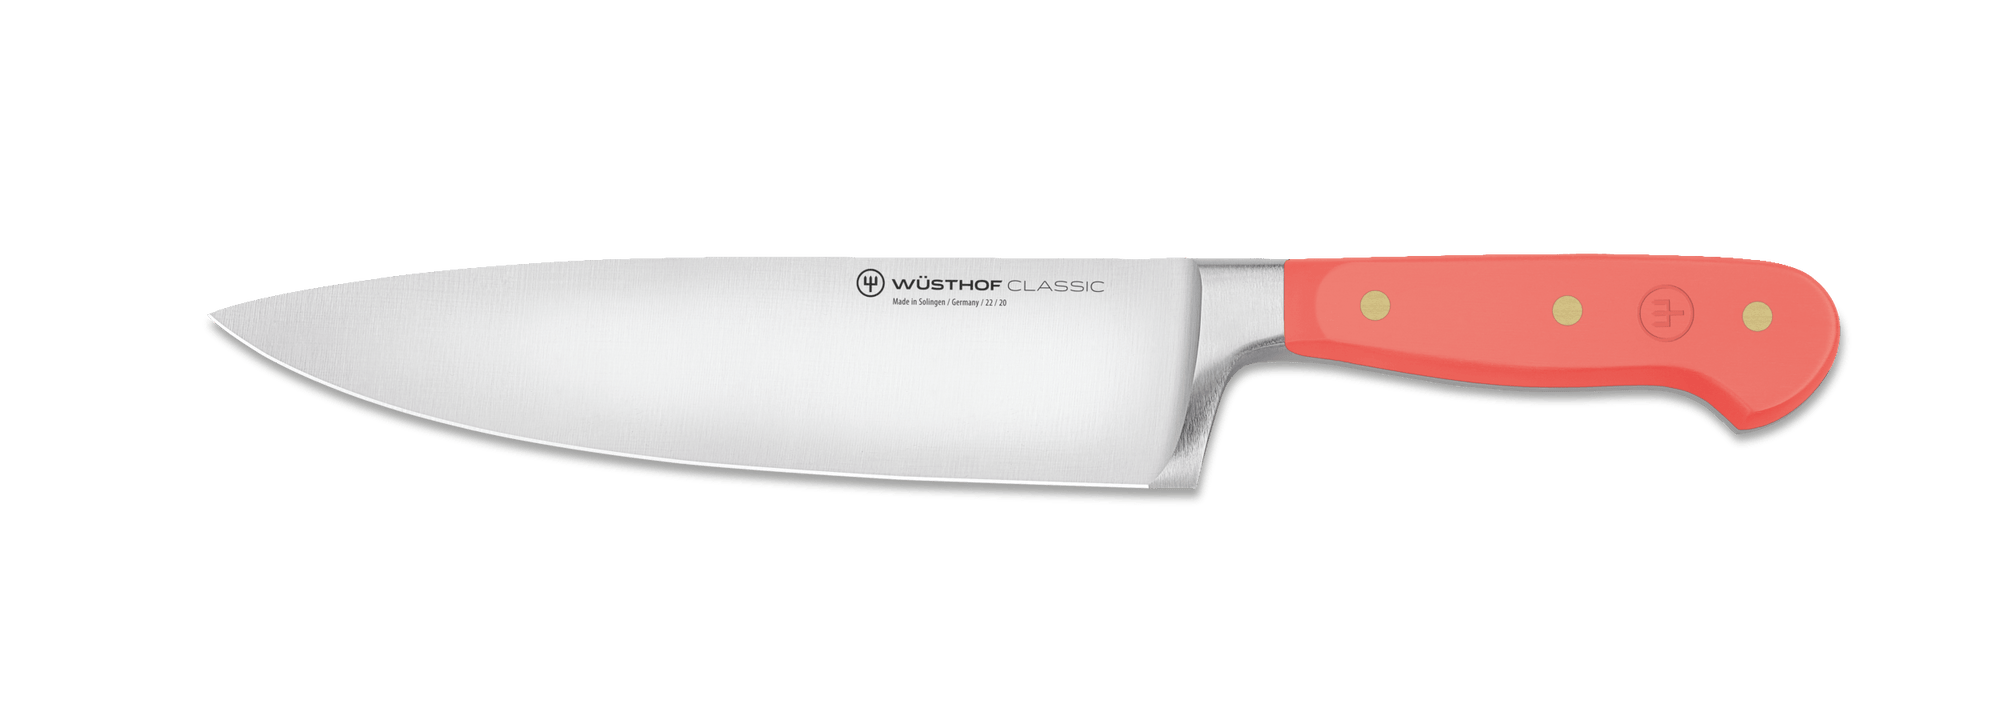 Wusthof Chef's Knives Wusthof Classic 8" Chef's Knife - Coral